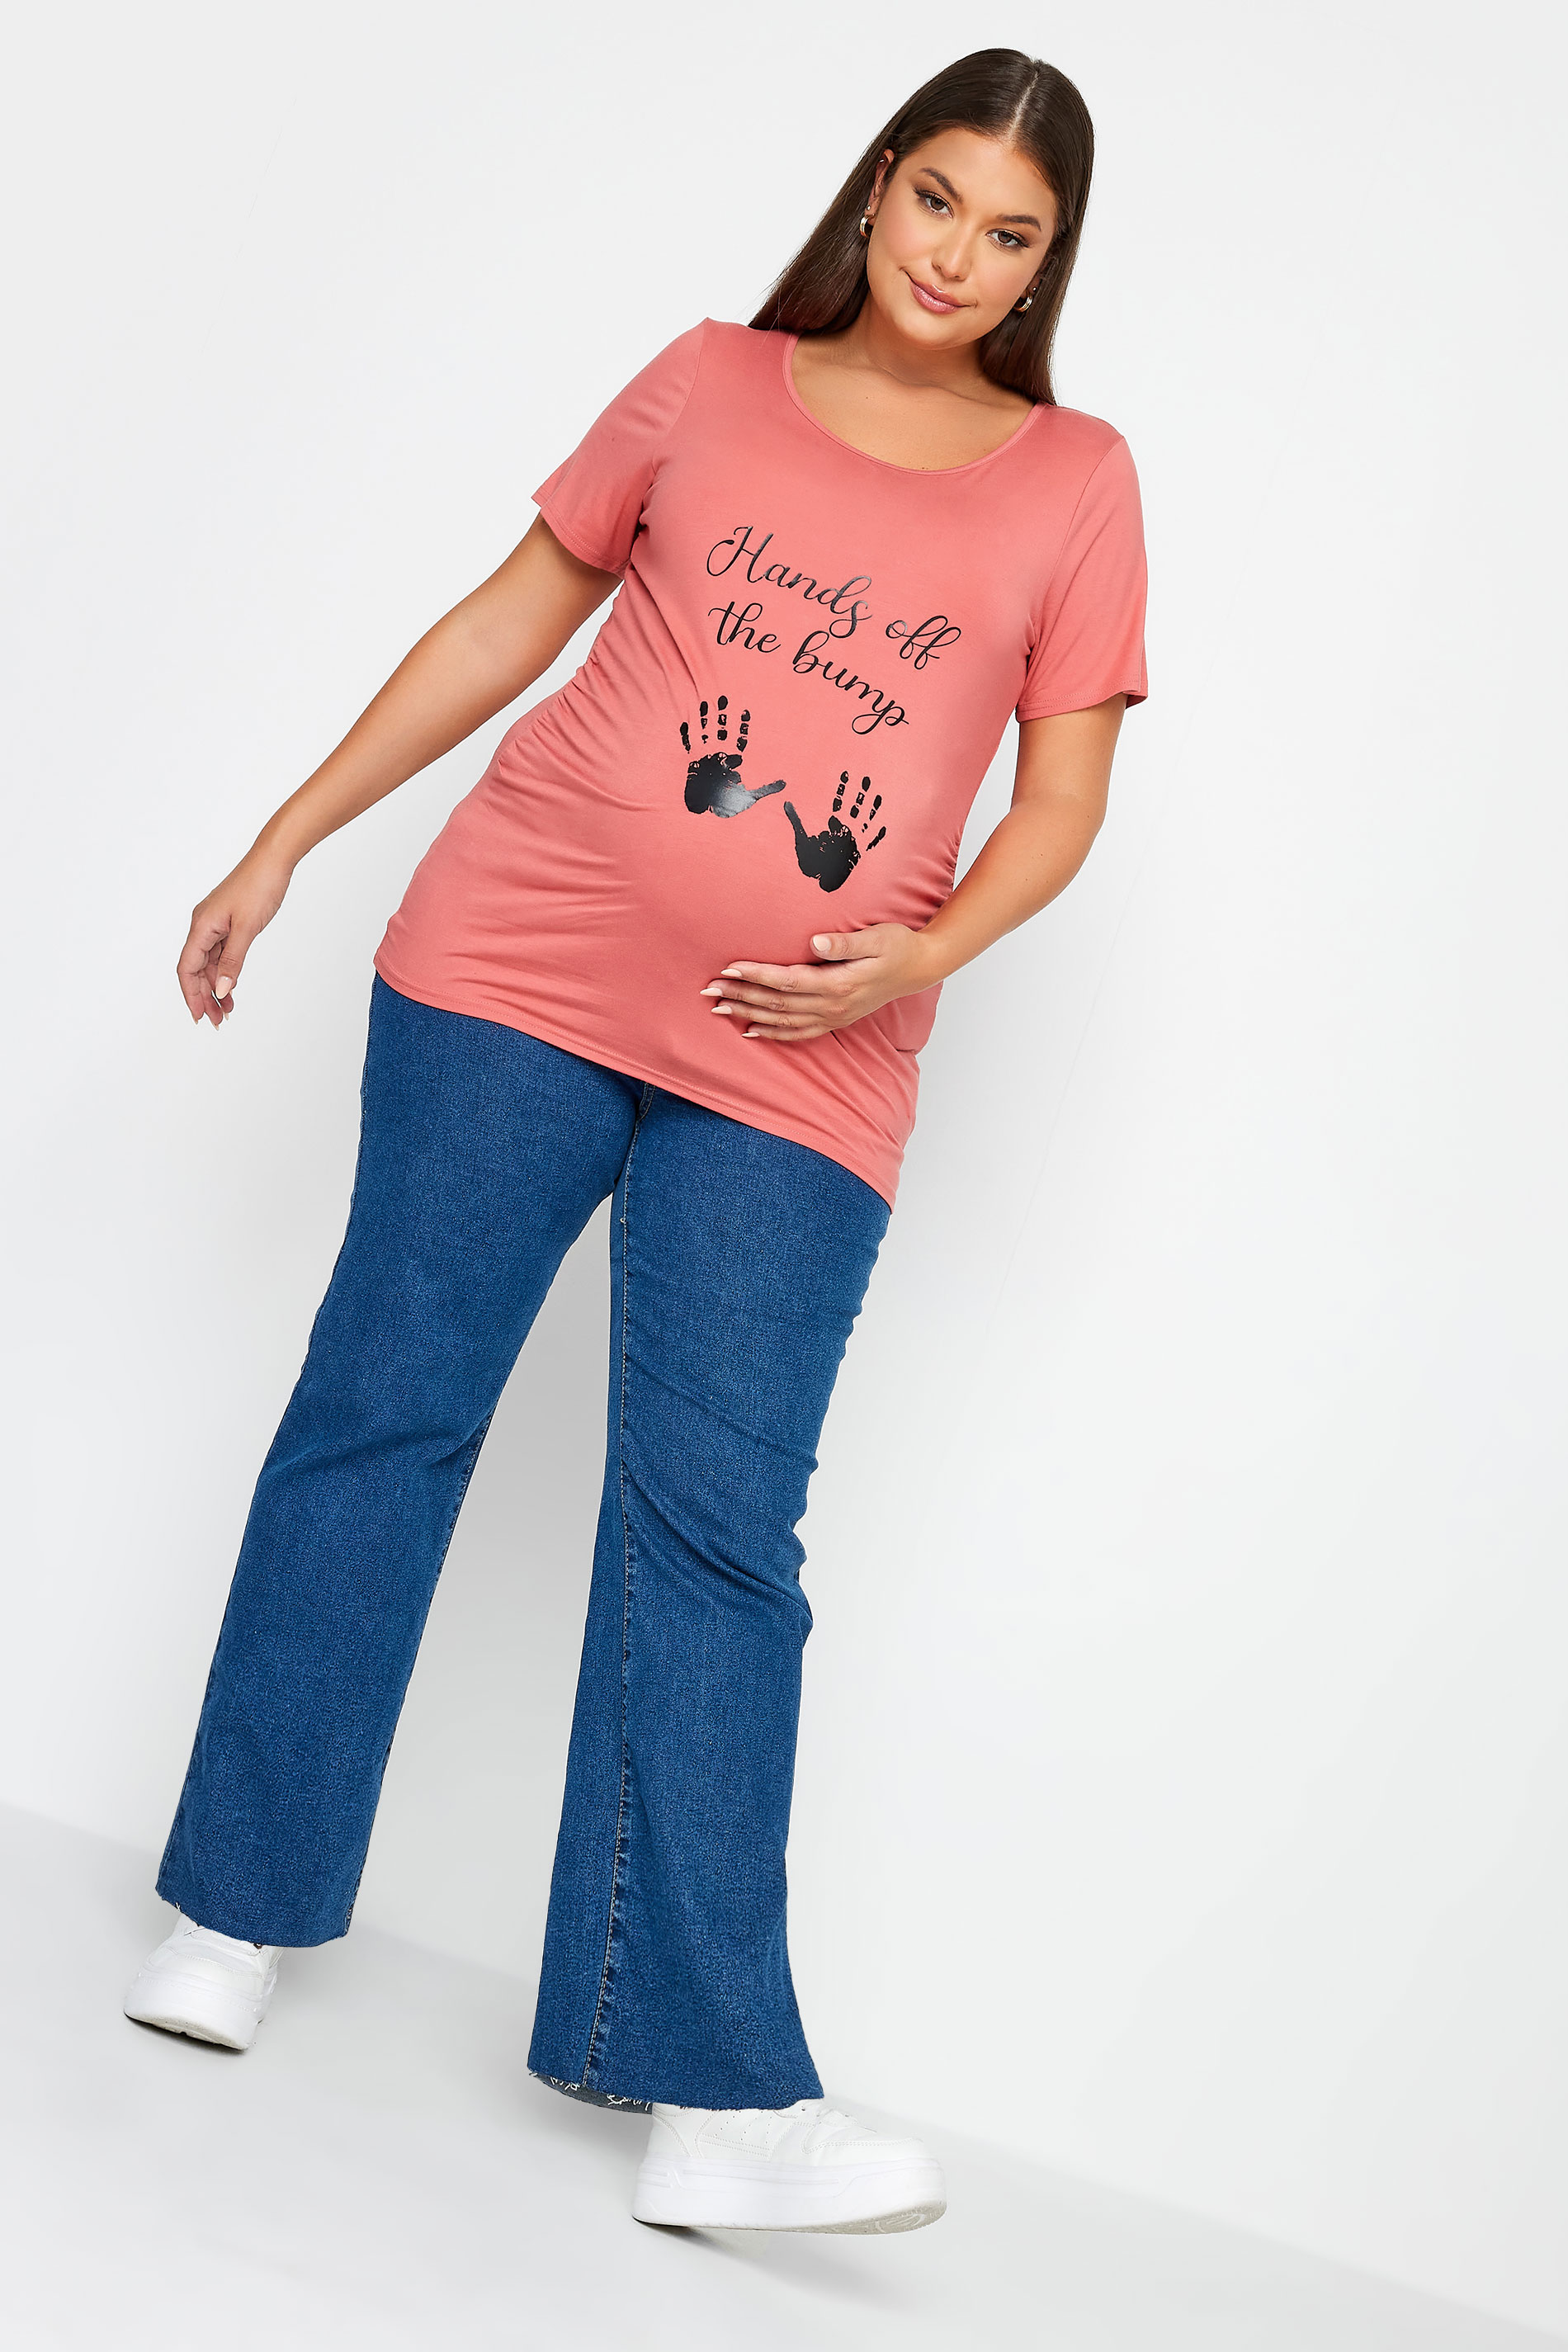 BUMP IT UP MATERNITY Plus Size Pink 'Hands Off The Bump' Slogan T-shirt | Yours Clothing 2